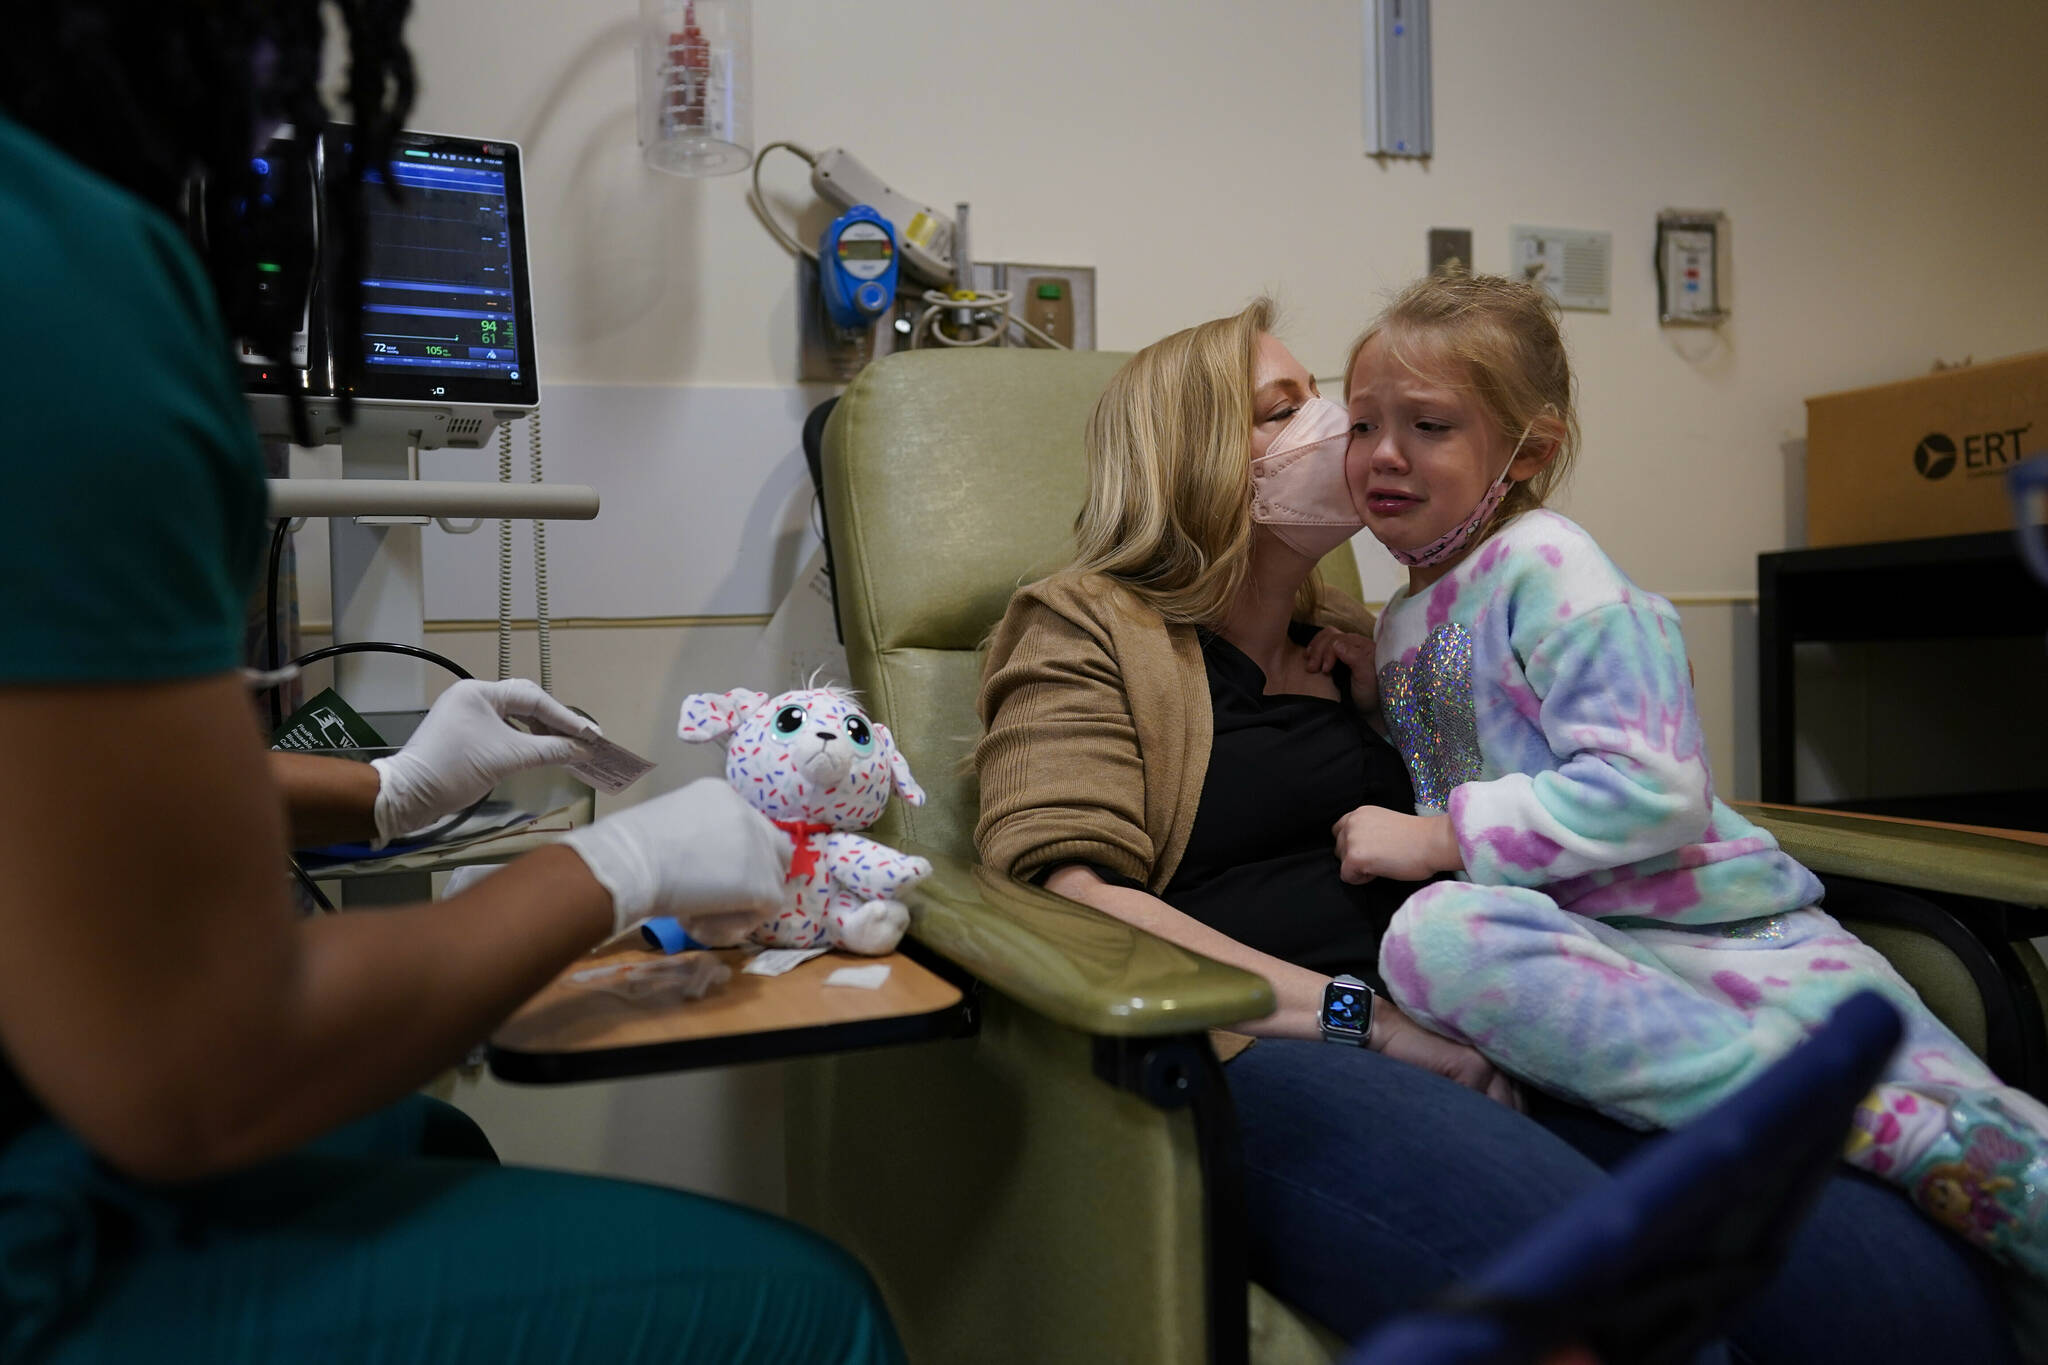 Kate Forte kisses her daughter, Lexie Stroiney, 6, as research nurse Michelle Harris, left, demonstrates a blood draw on her stuffed animal “Sprinkles” at Children’s National Hospital, in Washington, Wednesday, Jan. 26, 2022. Lexie had COVID-19 and is part of a NIH-funded multi-year study at Children’s National Hospital to look at impacts of COVID-19 on children’s physical health and quality of life. (AP Photo/Carolyn Kaster)